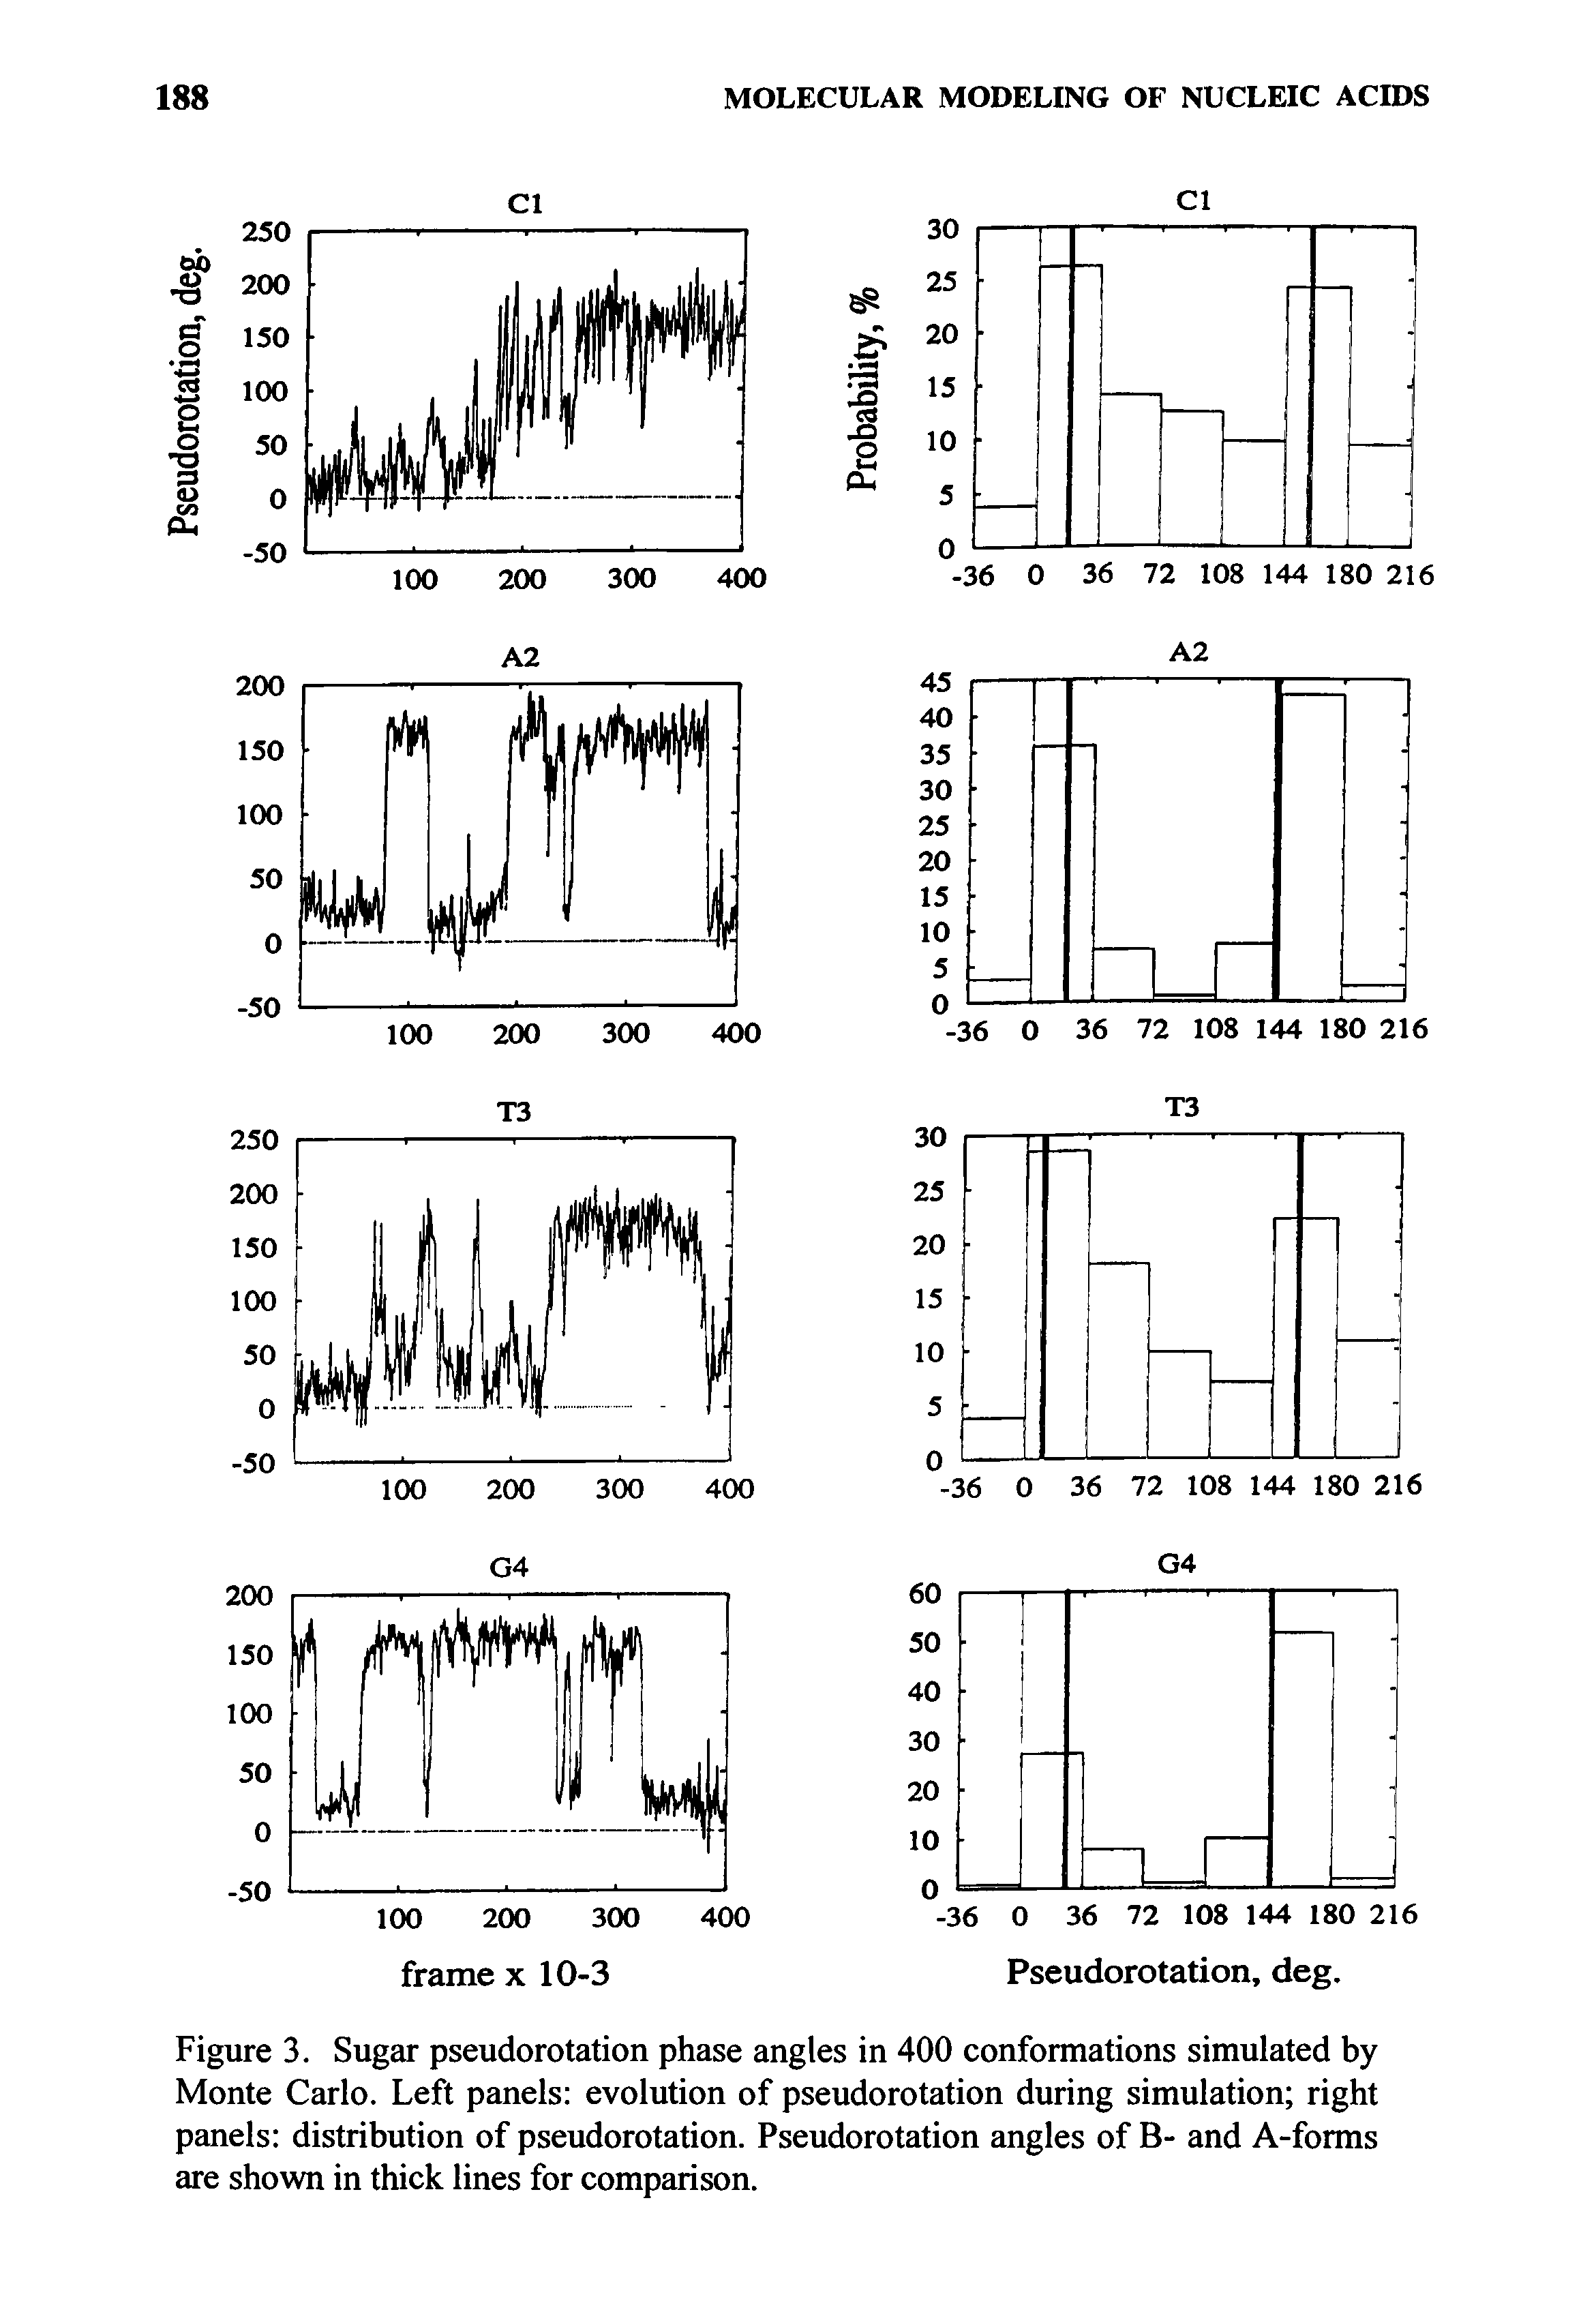 Figure 3. Sugar pseudorotation phase angles in 400 conformations simulated by Monte Carlo. Left panels evolution of pseudorotation during simulation right panels distribution of pseudorotation. Pseudorotation angles of B- and A-forms are shown in thick lines for comparison.